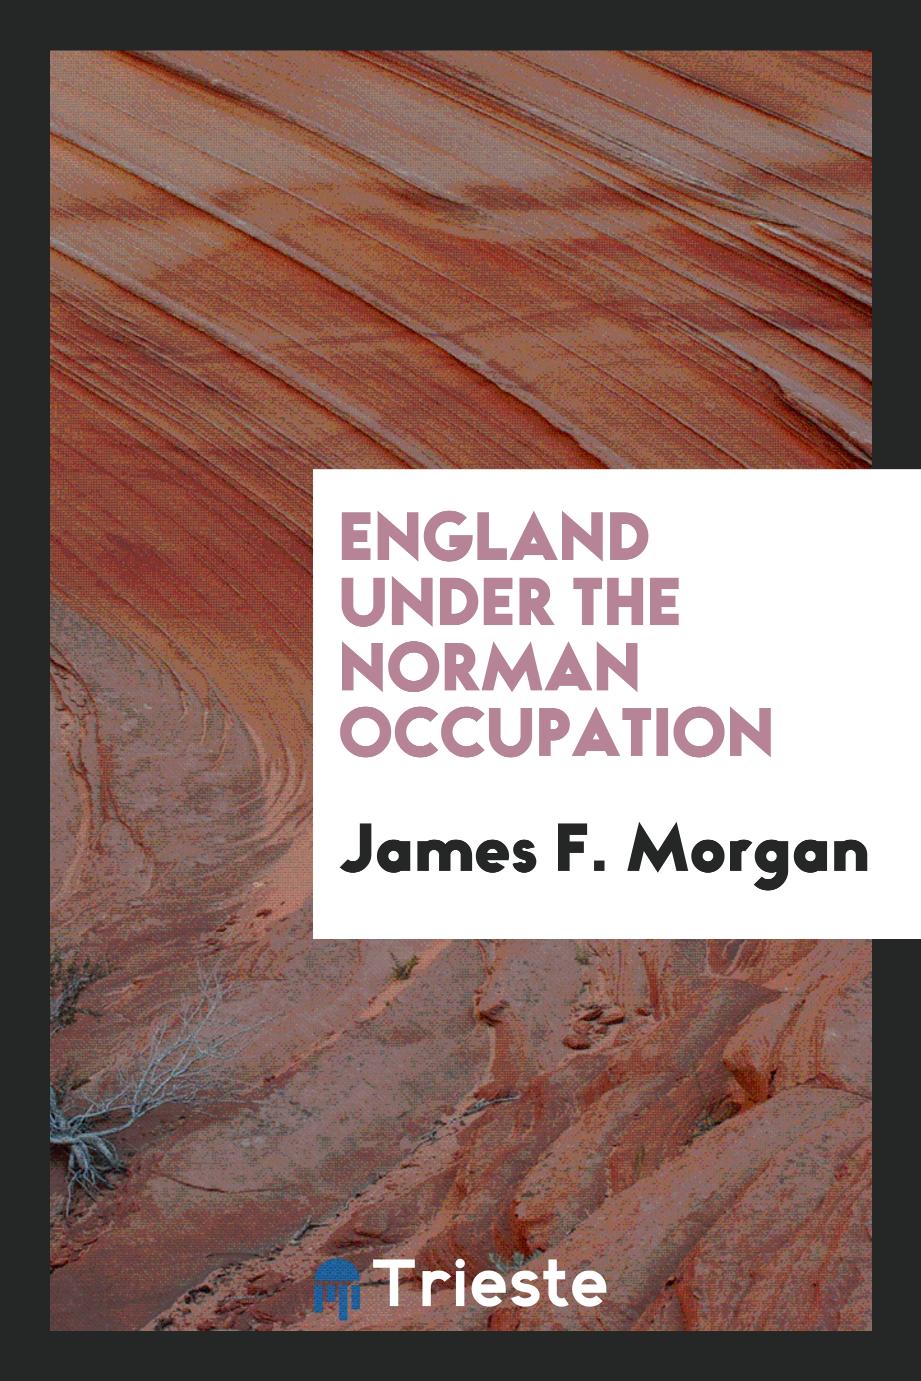 James F. Morgan - England under the Norman Occupation